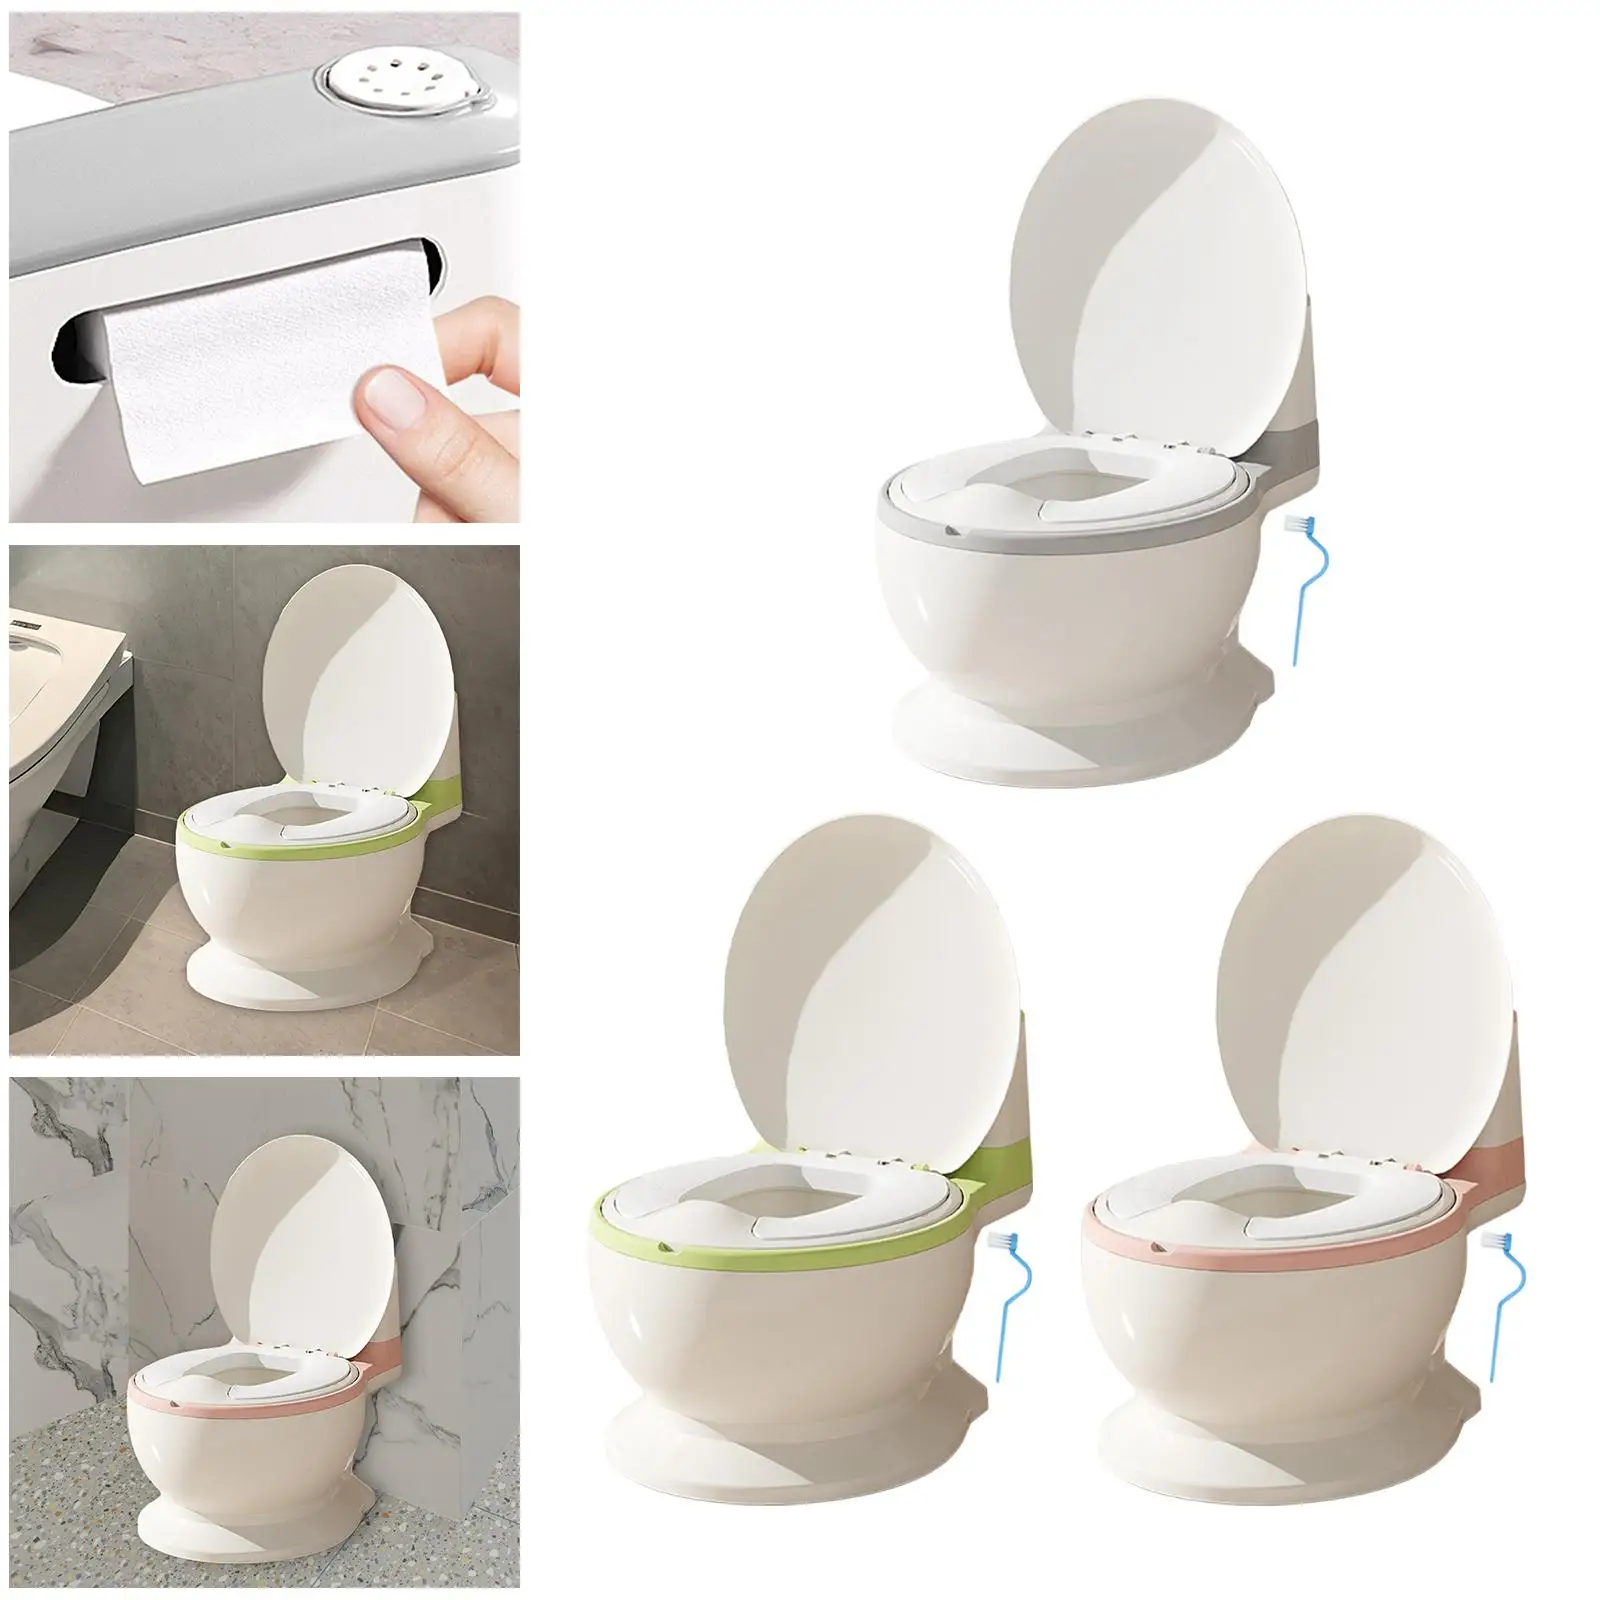 Toilet Training Potty (Brush Included) Realistic Toilet Real Feel Potty Potty Seat for Ages 0-7 Infants Girls Boys Kids Babies